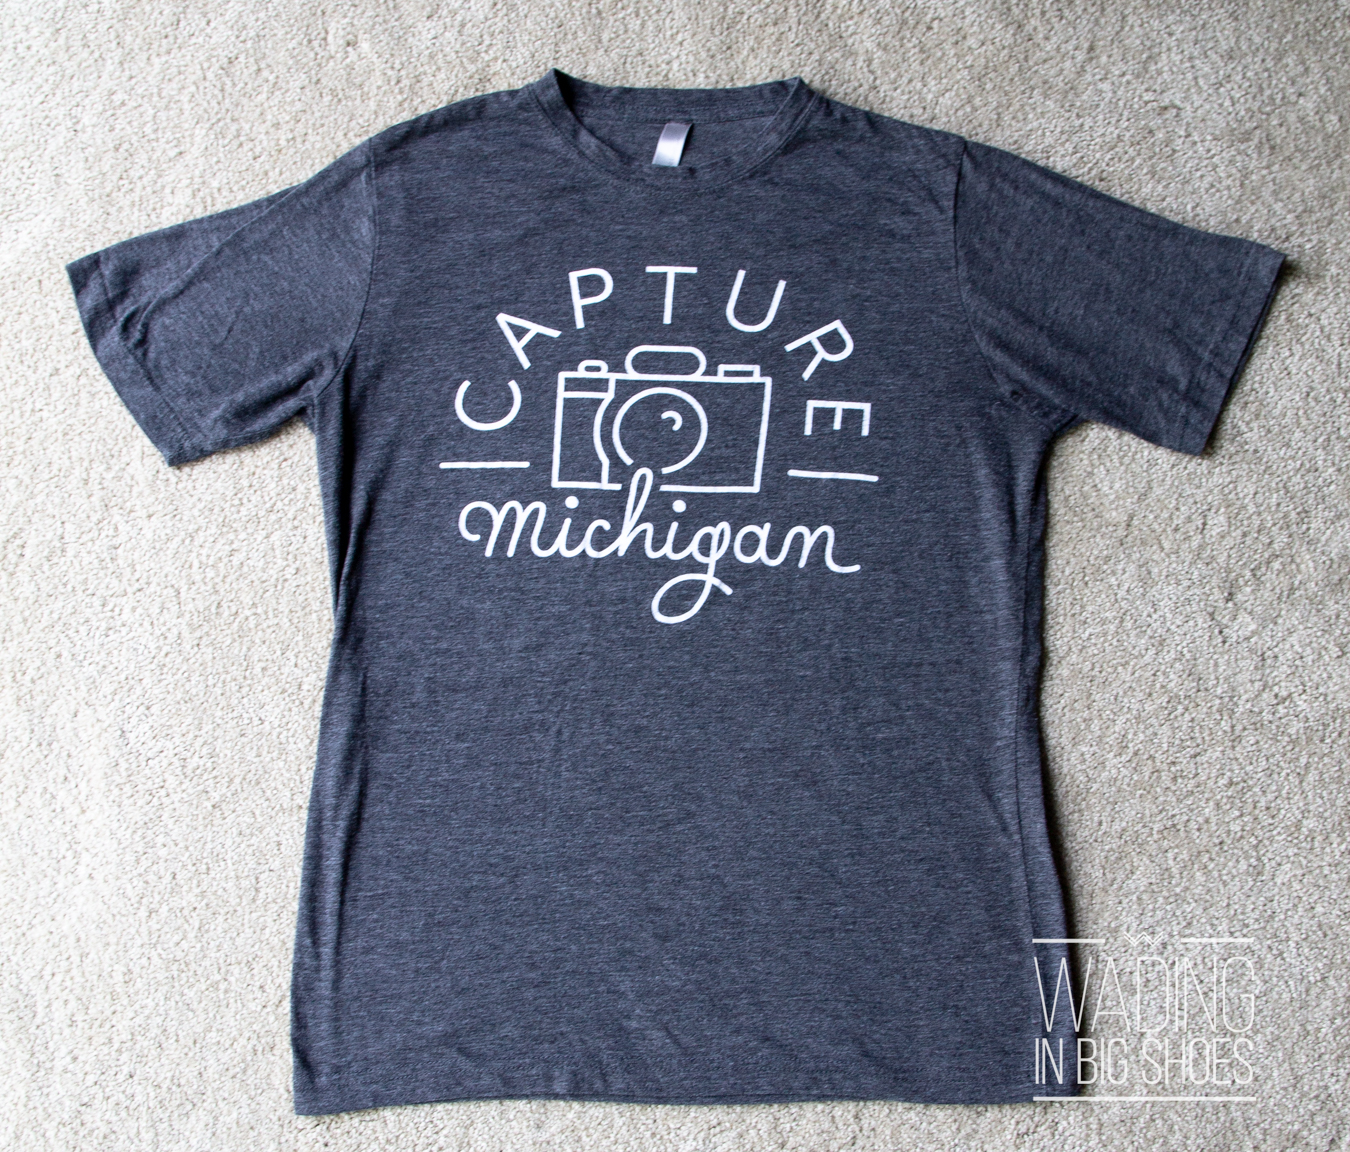 Wading in Big Shoes - Local Fashion Love: My (Mostly Detroit) Michigan T-Shirt Collection